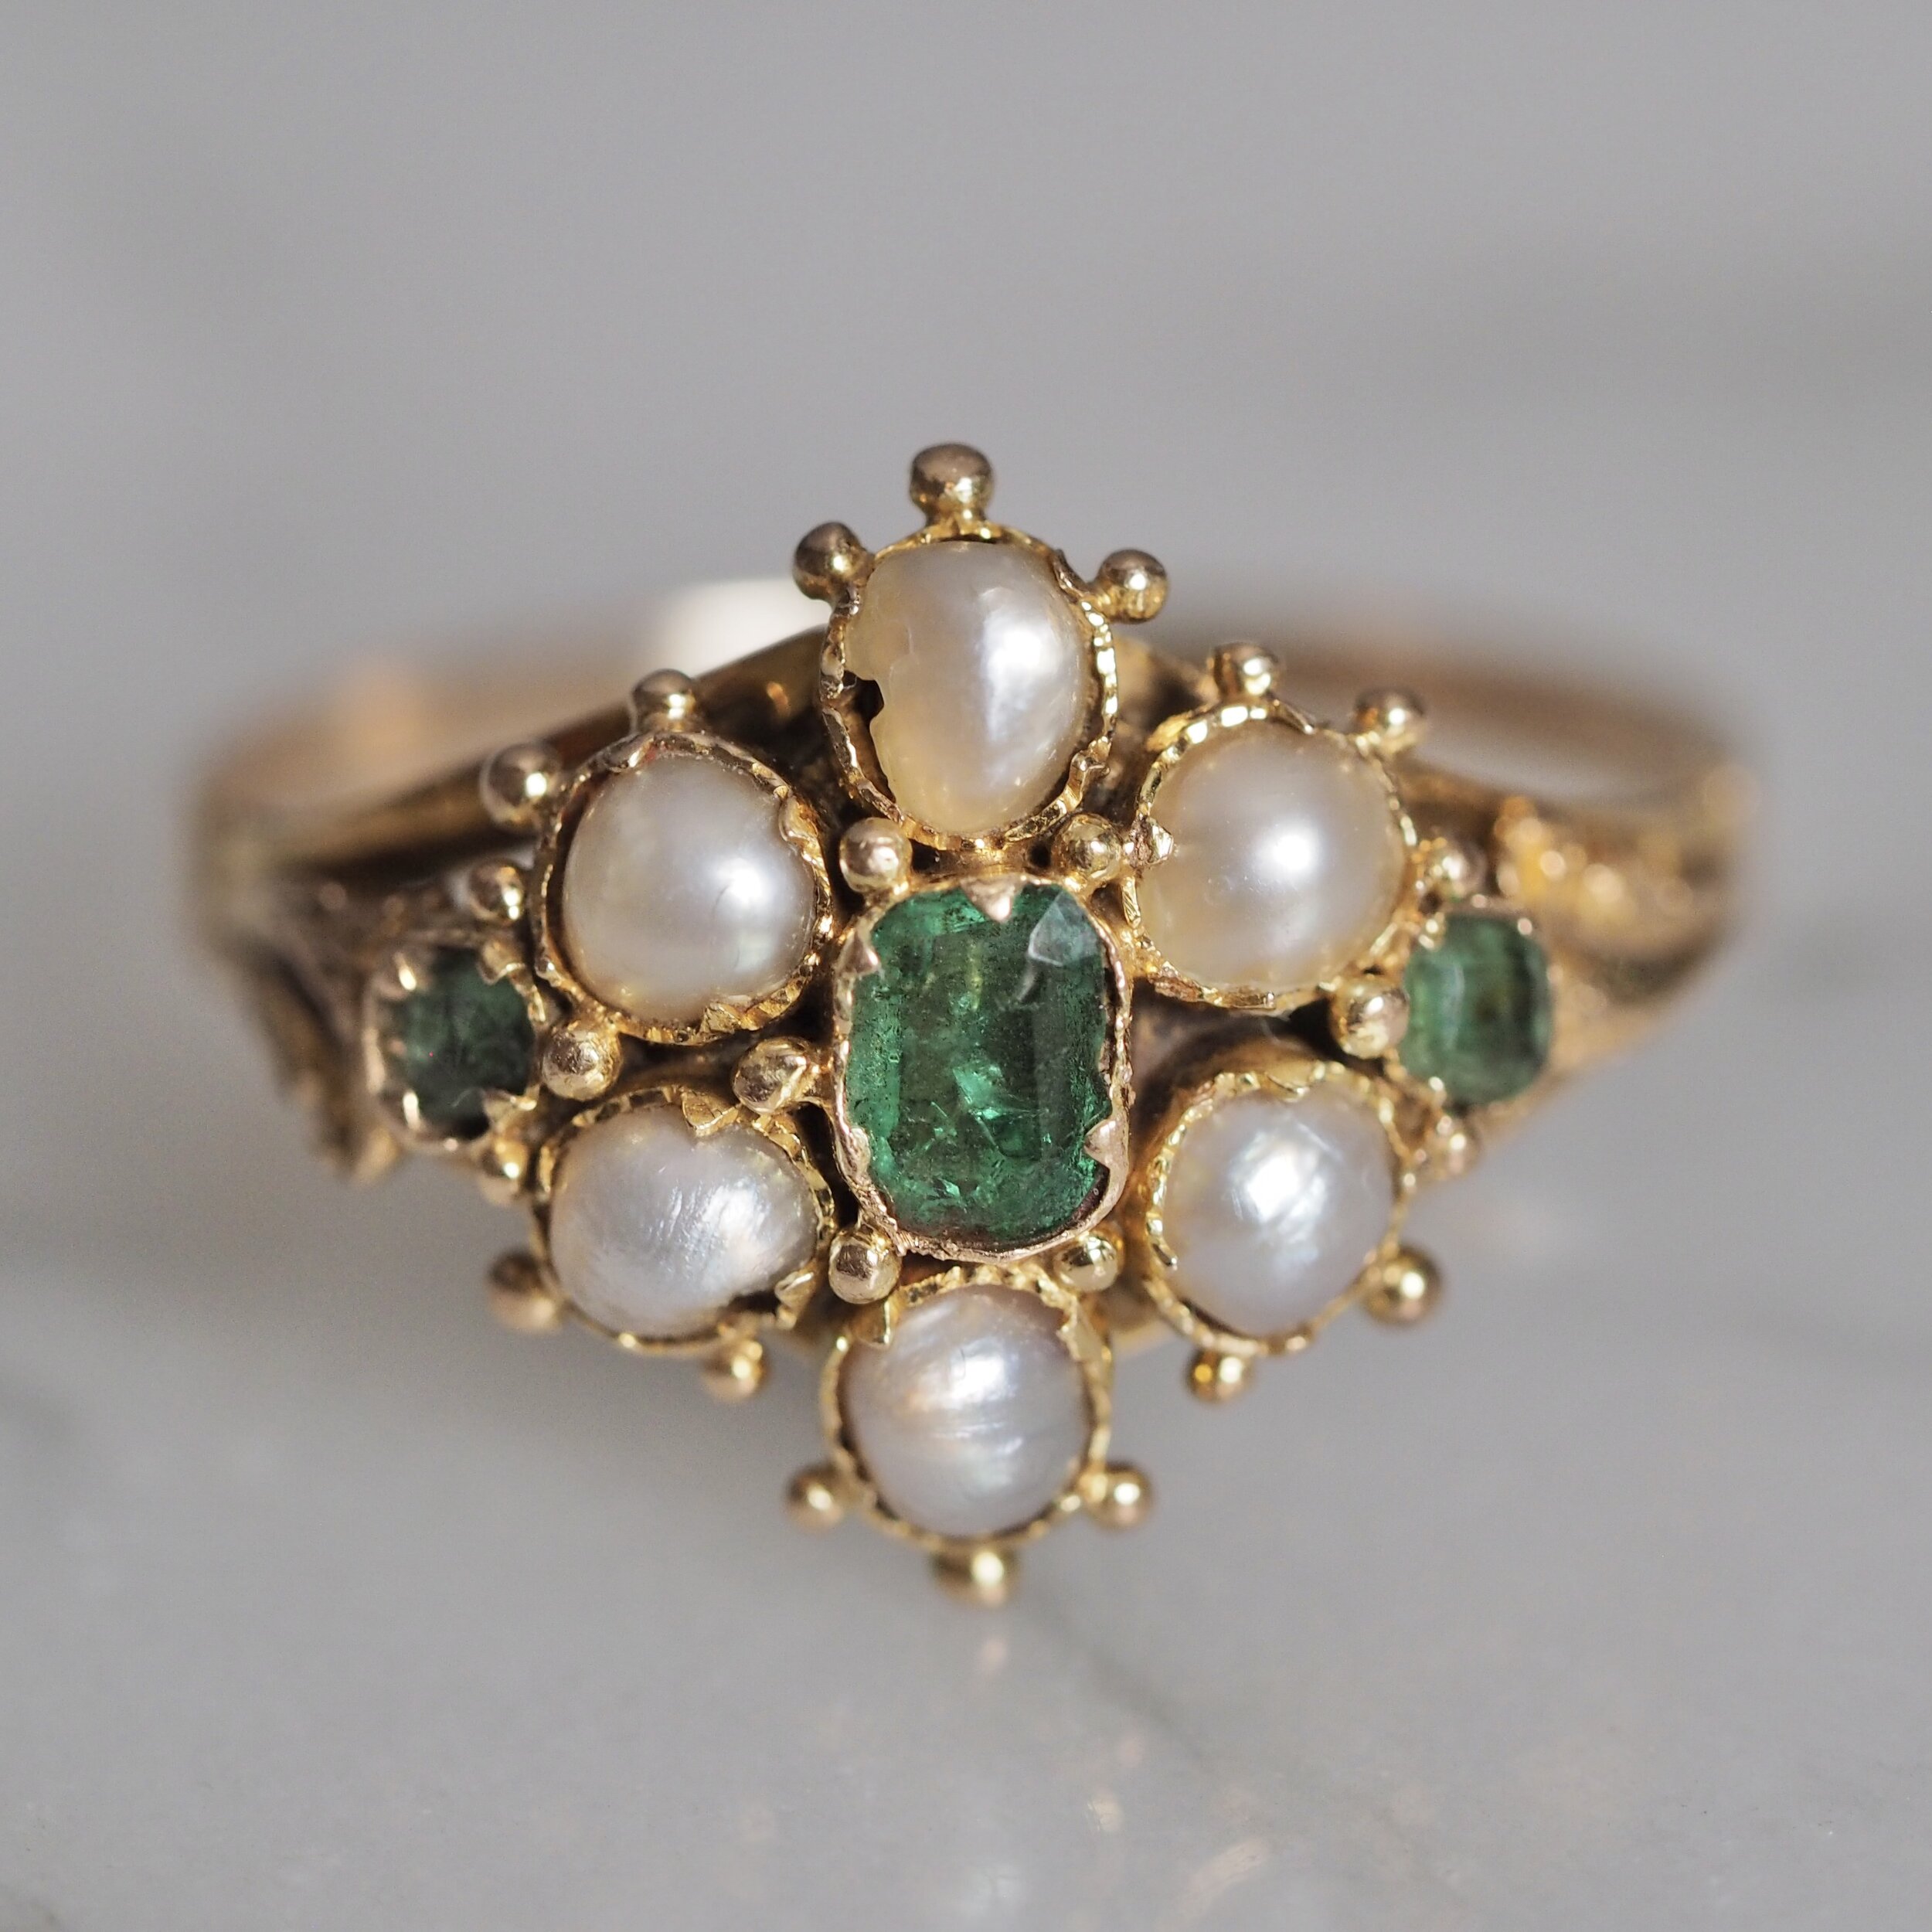 #454 GENUINE EMERALD & PEARL ANTIQUE STYLE .925 STERLING SILVER RING SIZE 8.75 